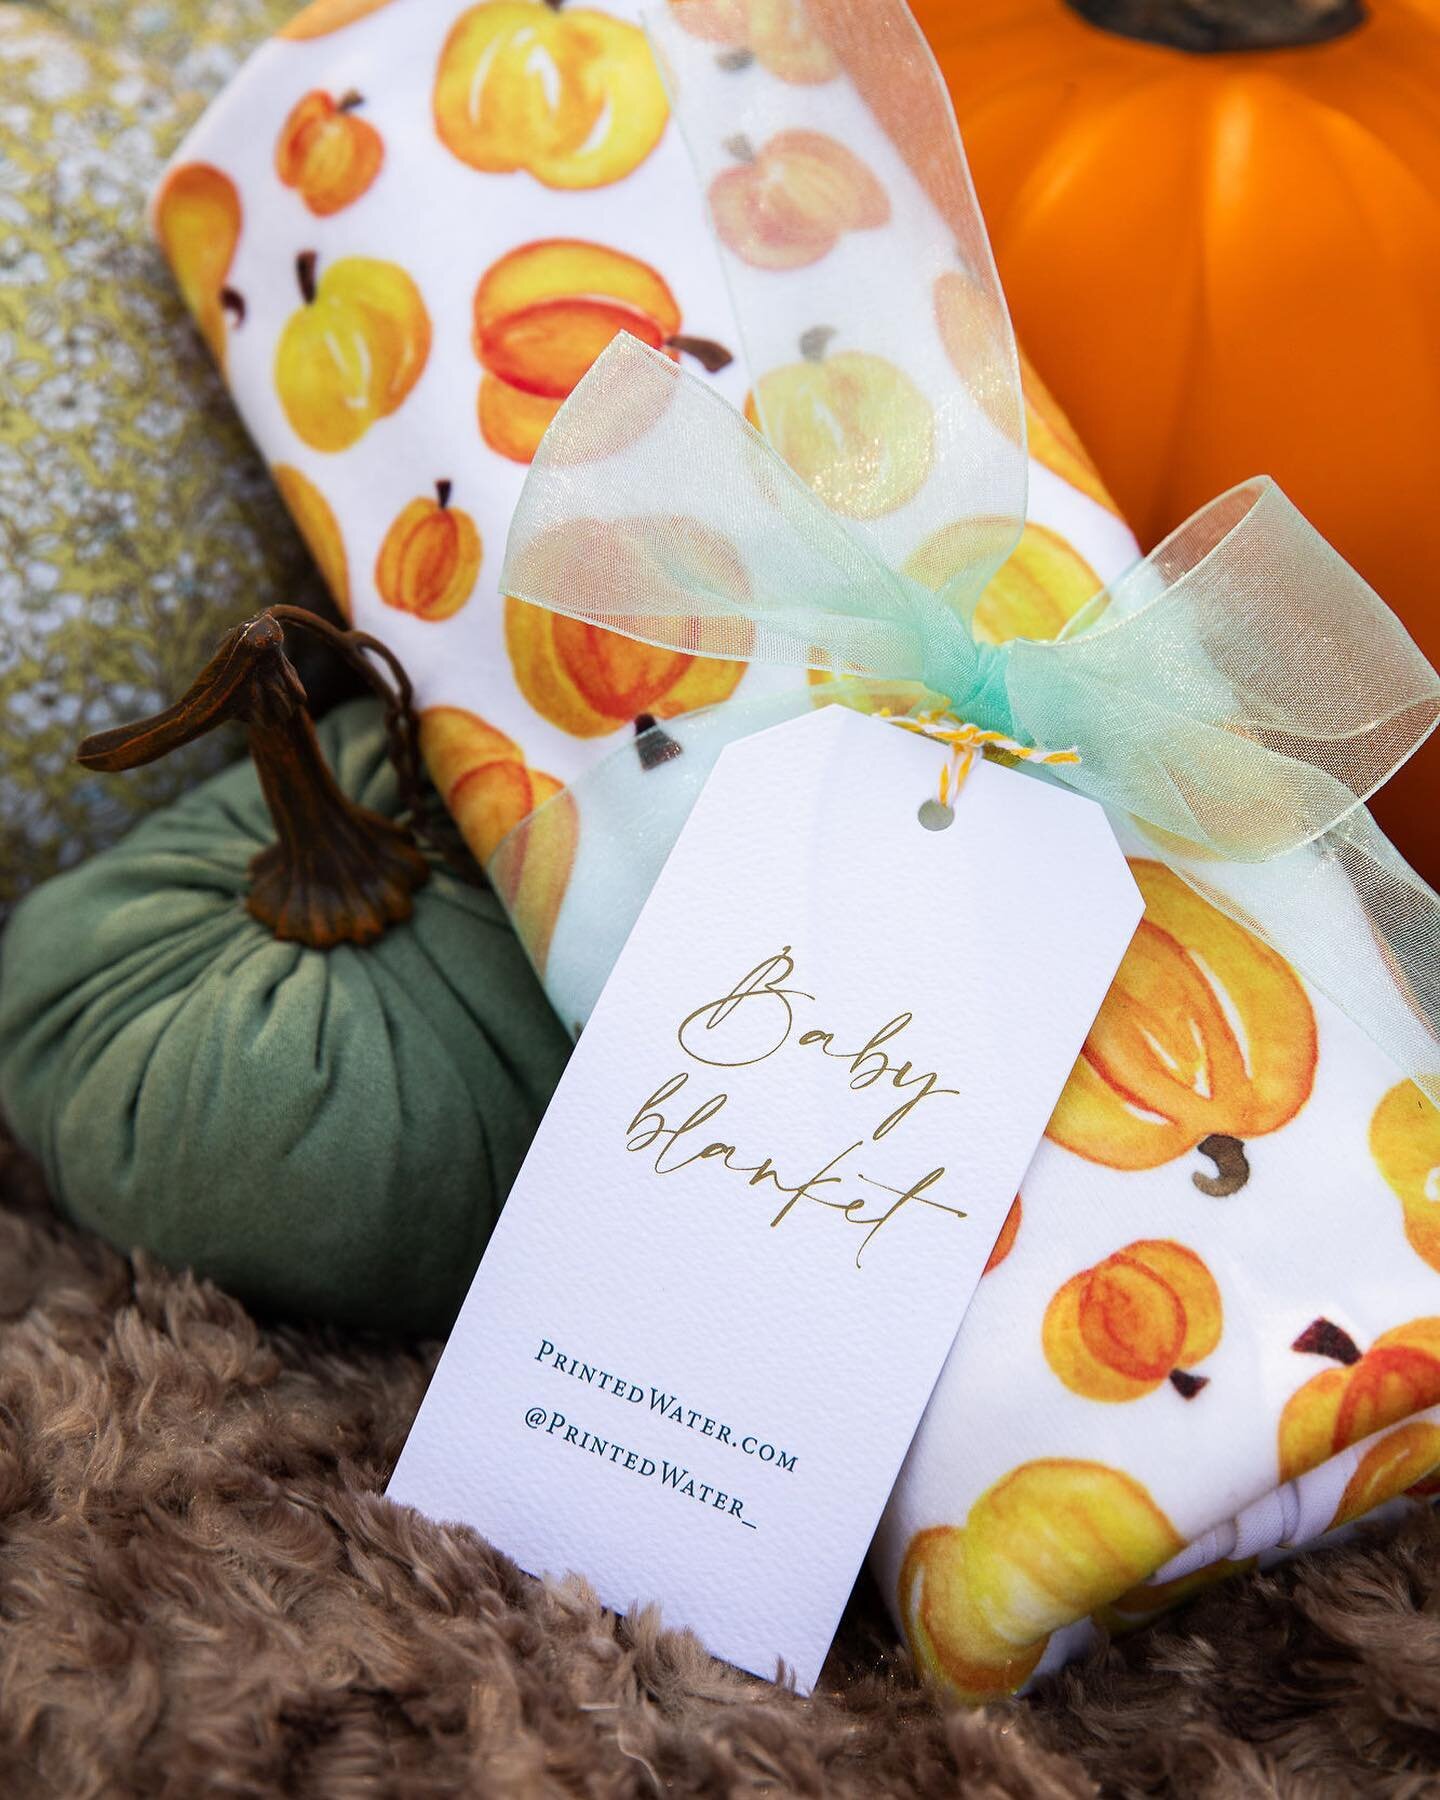 🍁 fall is just around the corner, and that means fall babies are, too! I&rsquo;ve seen my blueberry and moon baby blankets used in many &ldquo;welcome to the world&rdquo; photos and think my pumpkin baby blankets would be perfect for all of the lil 